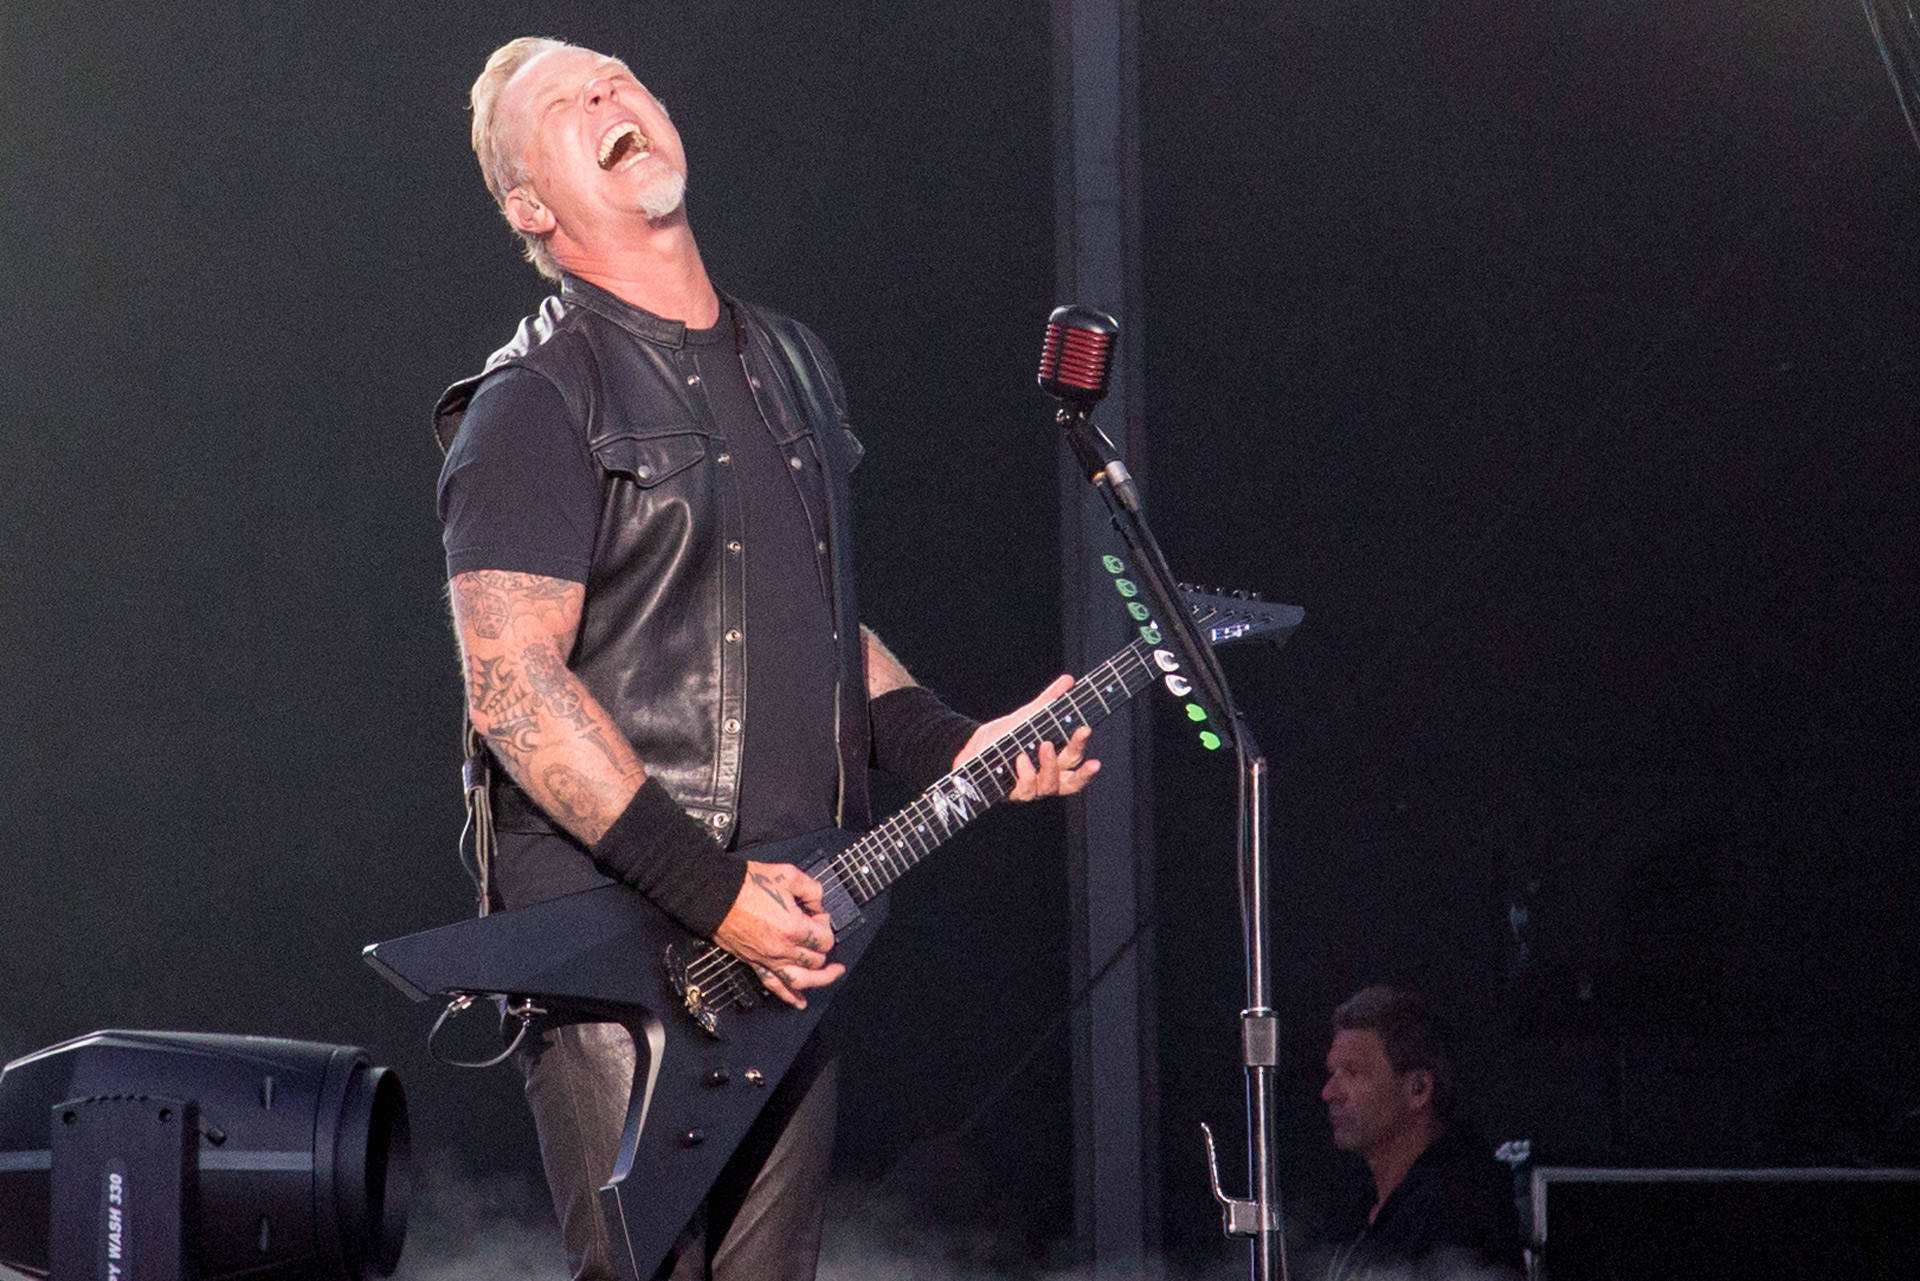 Metallica performs at the Outside Lands music festival in San Francisco, Aug. 12, 2017. Estefany Gonzalez